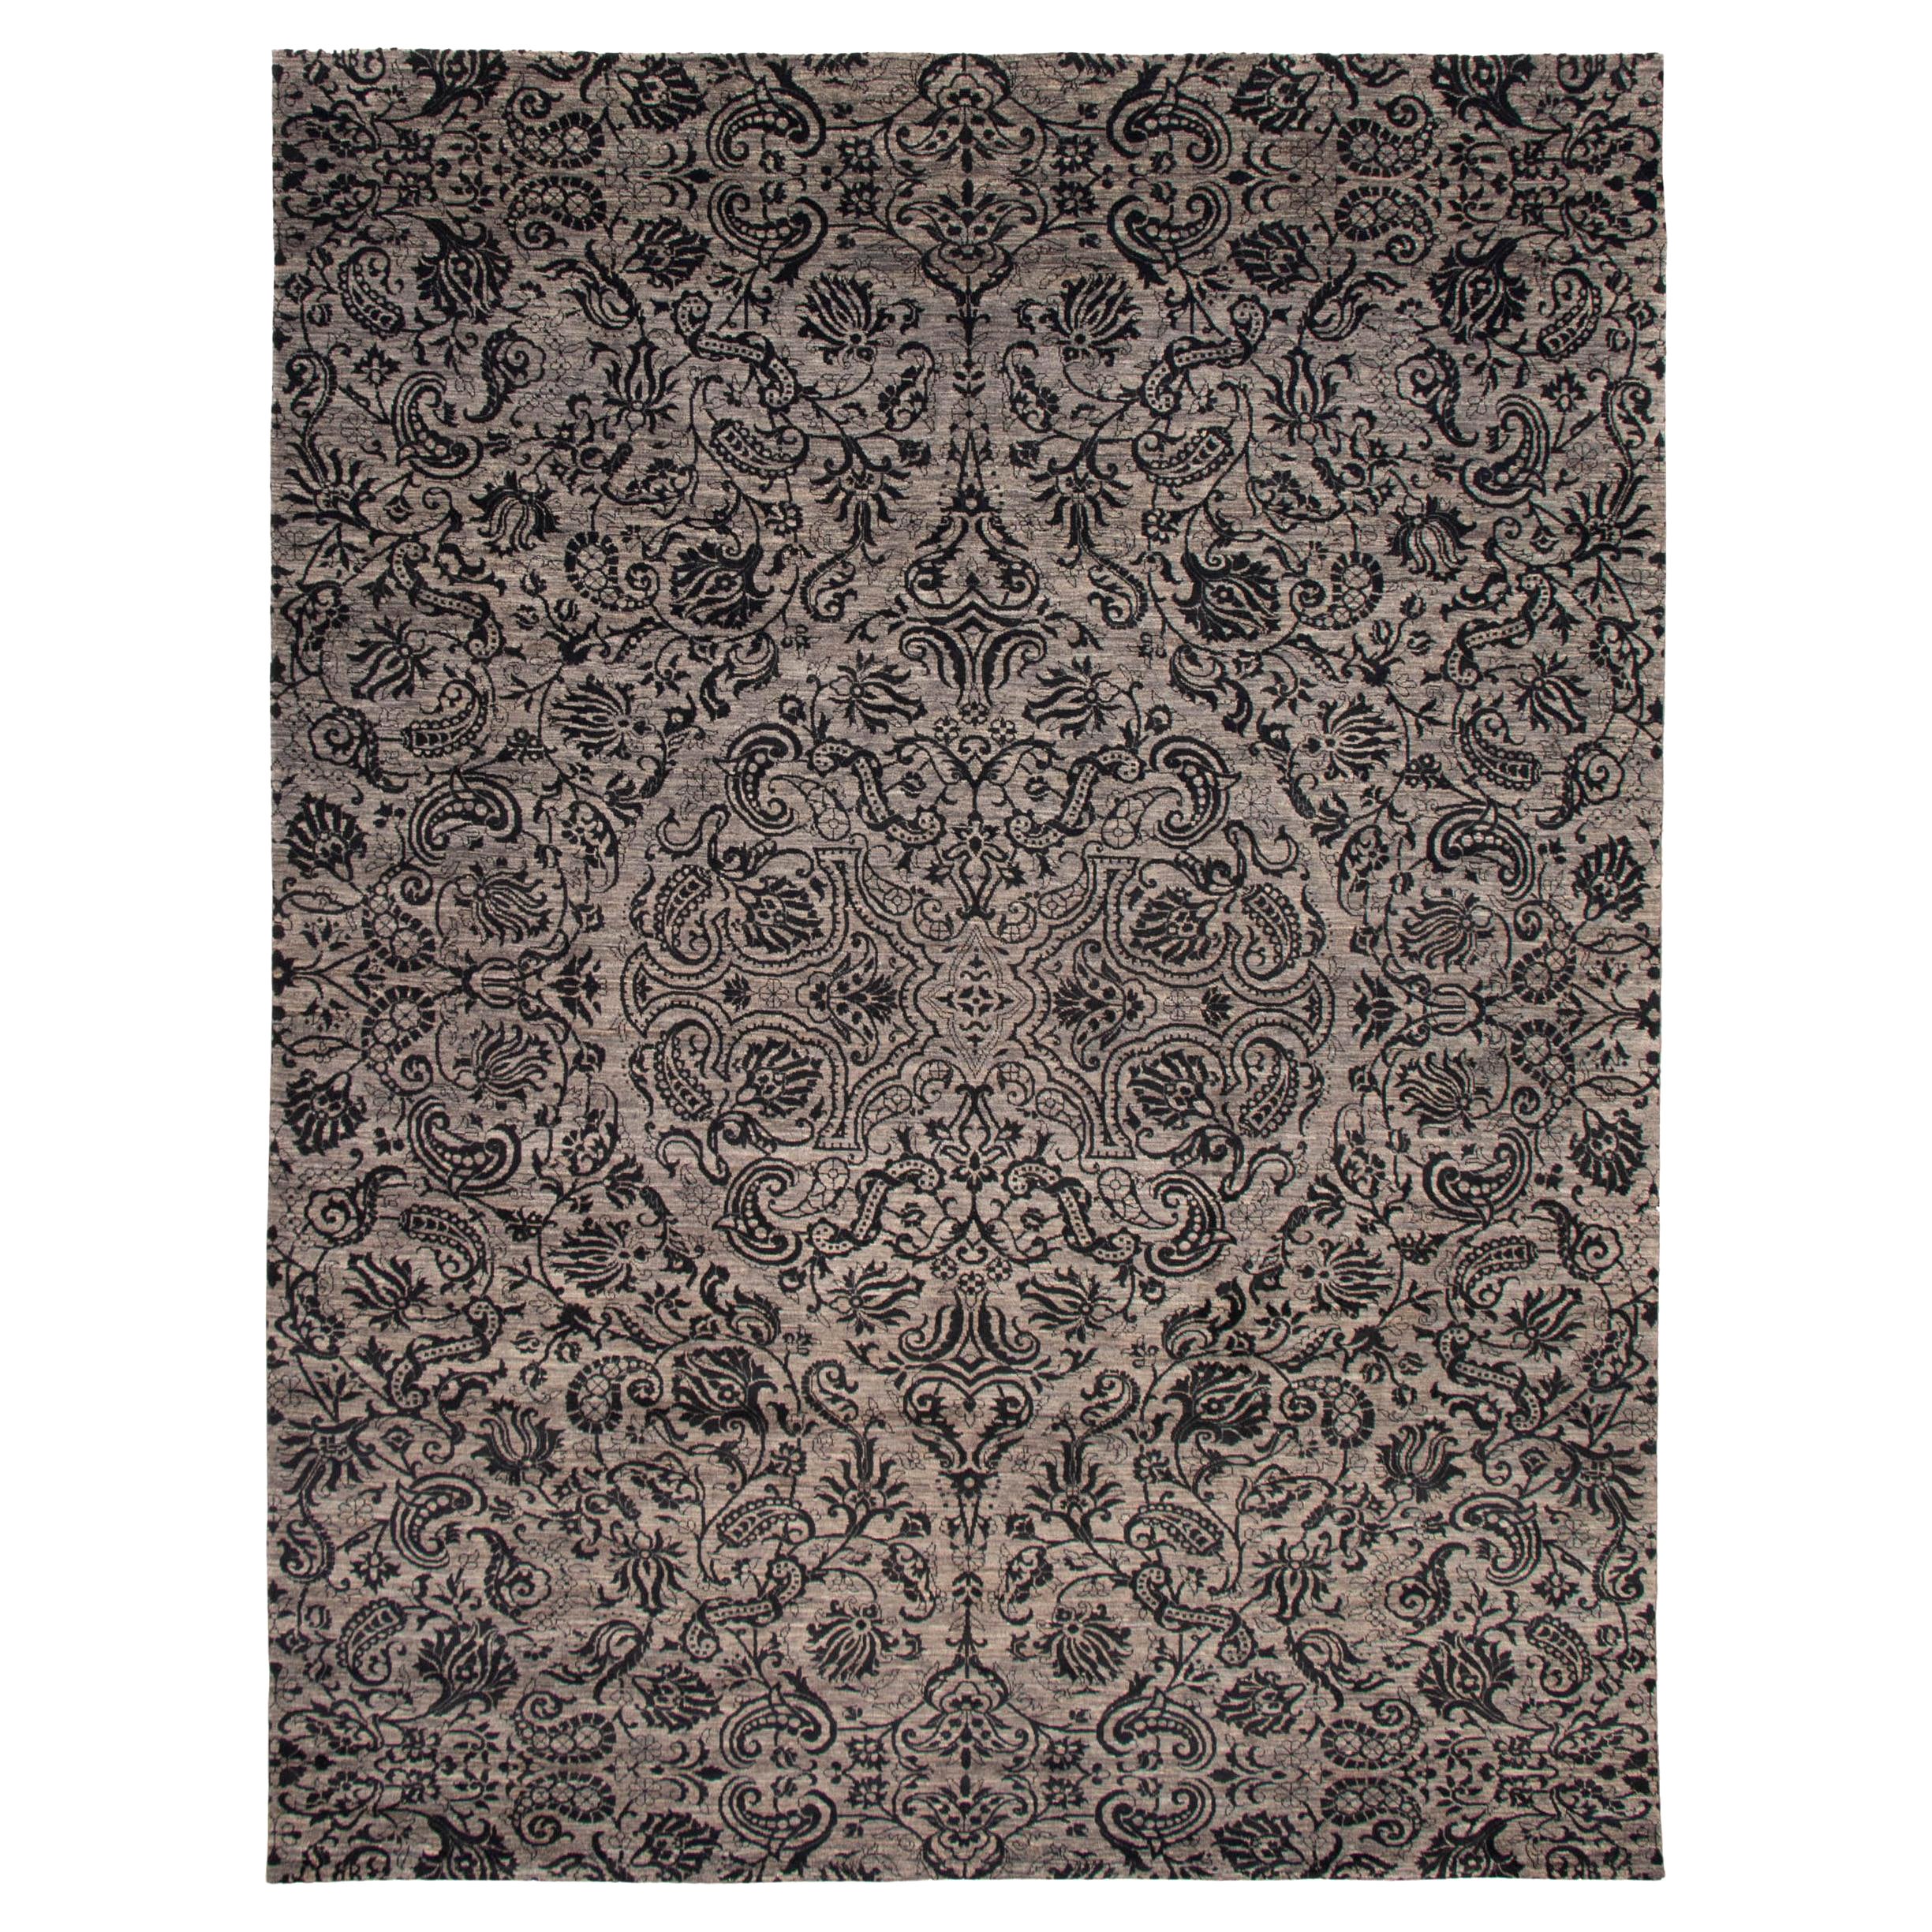 Gray and Black Wool Transitional Paisley Hand-Knotted Carpet, 9' x 12' For Sale